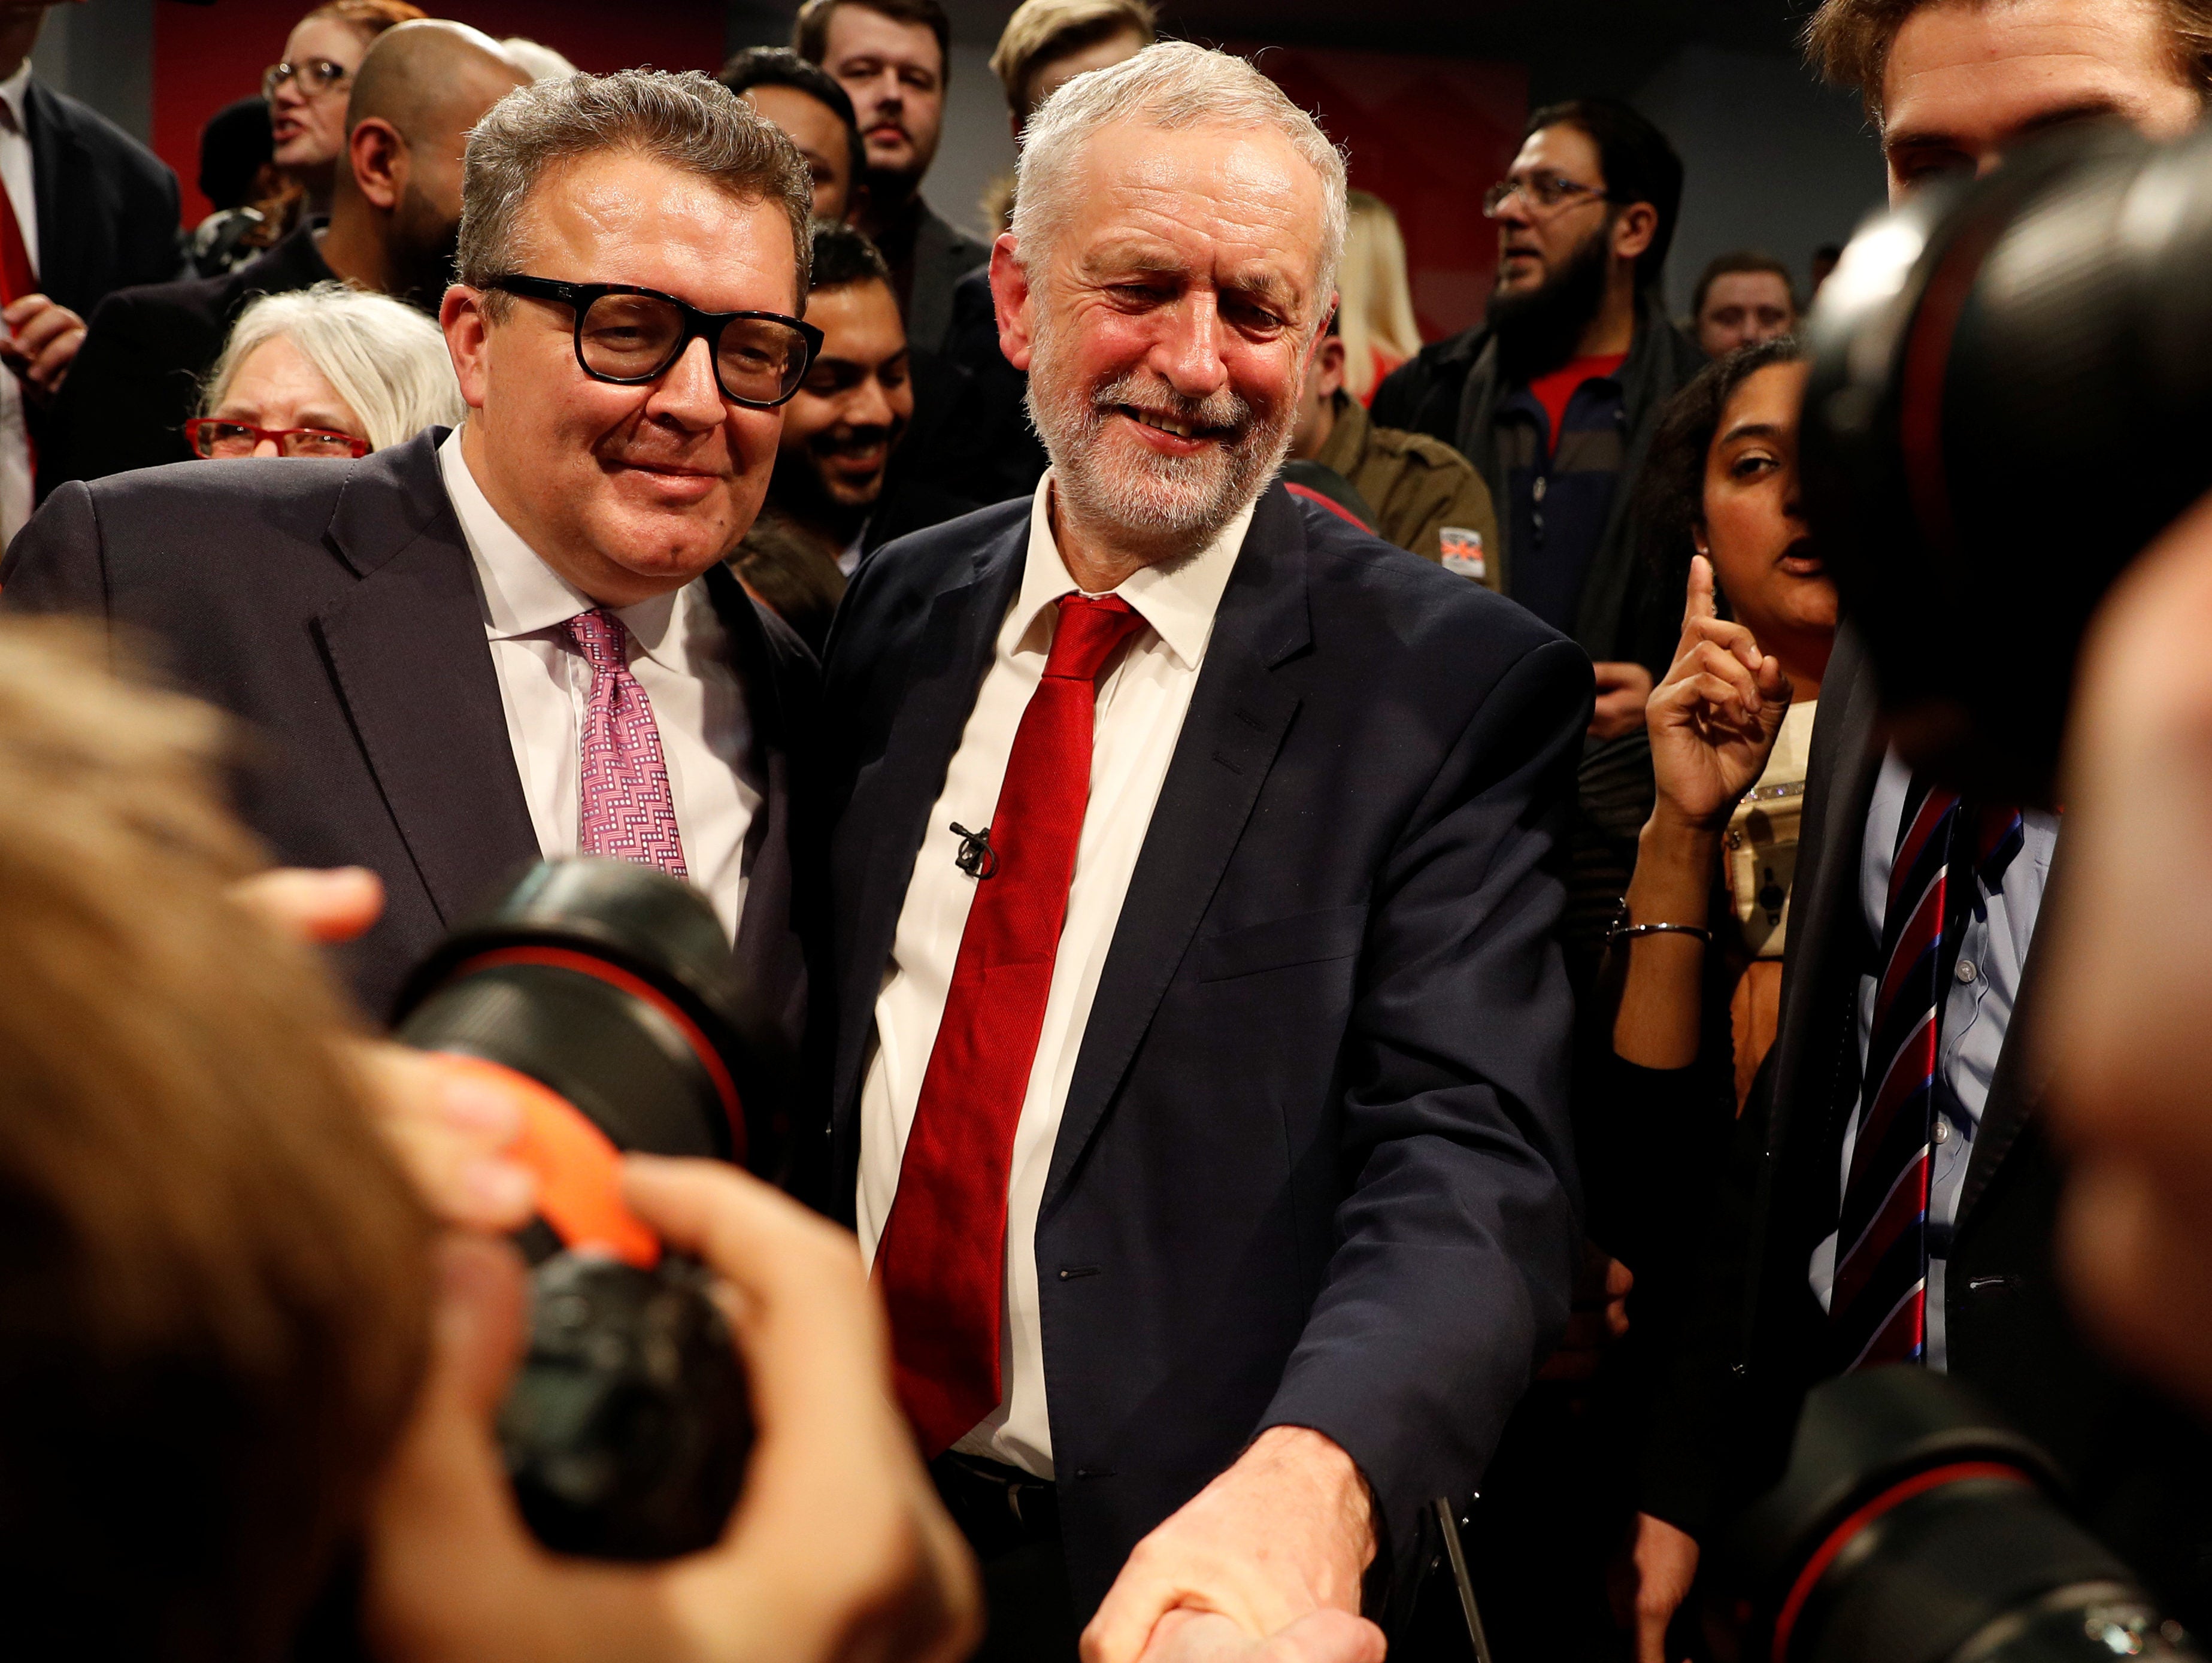 Public interest in Corbyn 'spy meeting' story is 'blindingly obvious' says Sun after Labour's Tom Watson accuses papers of 'propaganda'